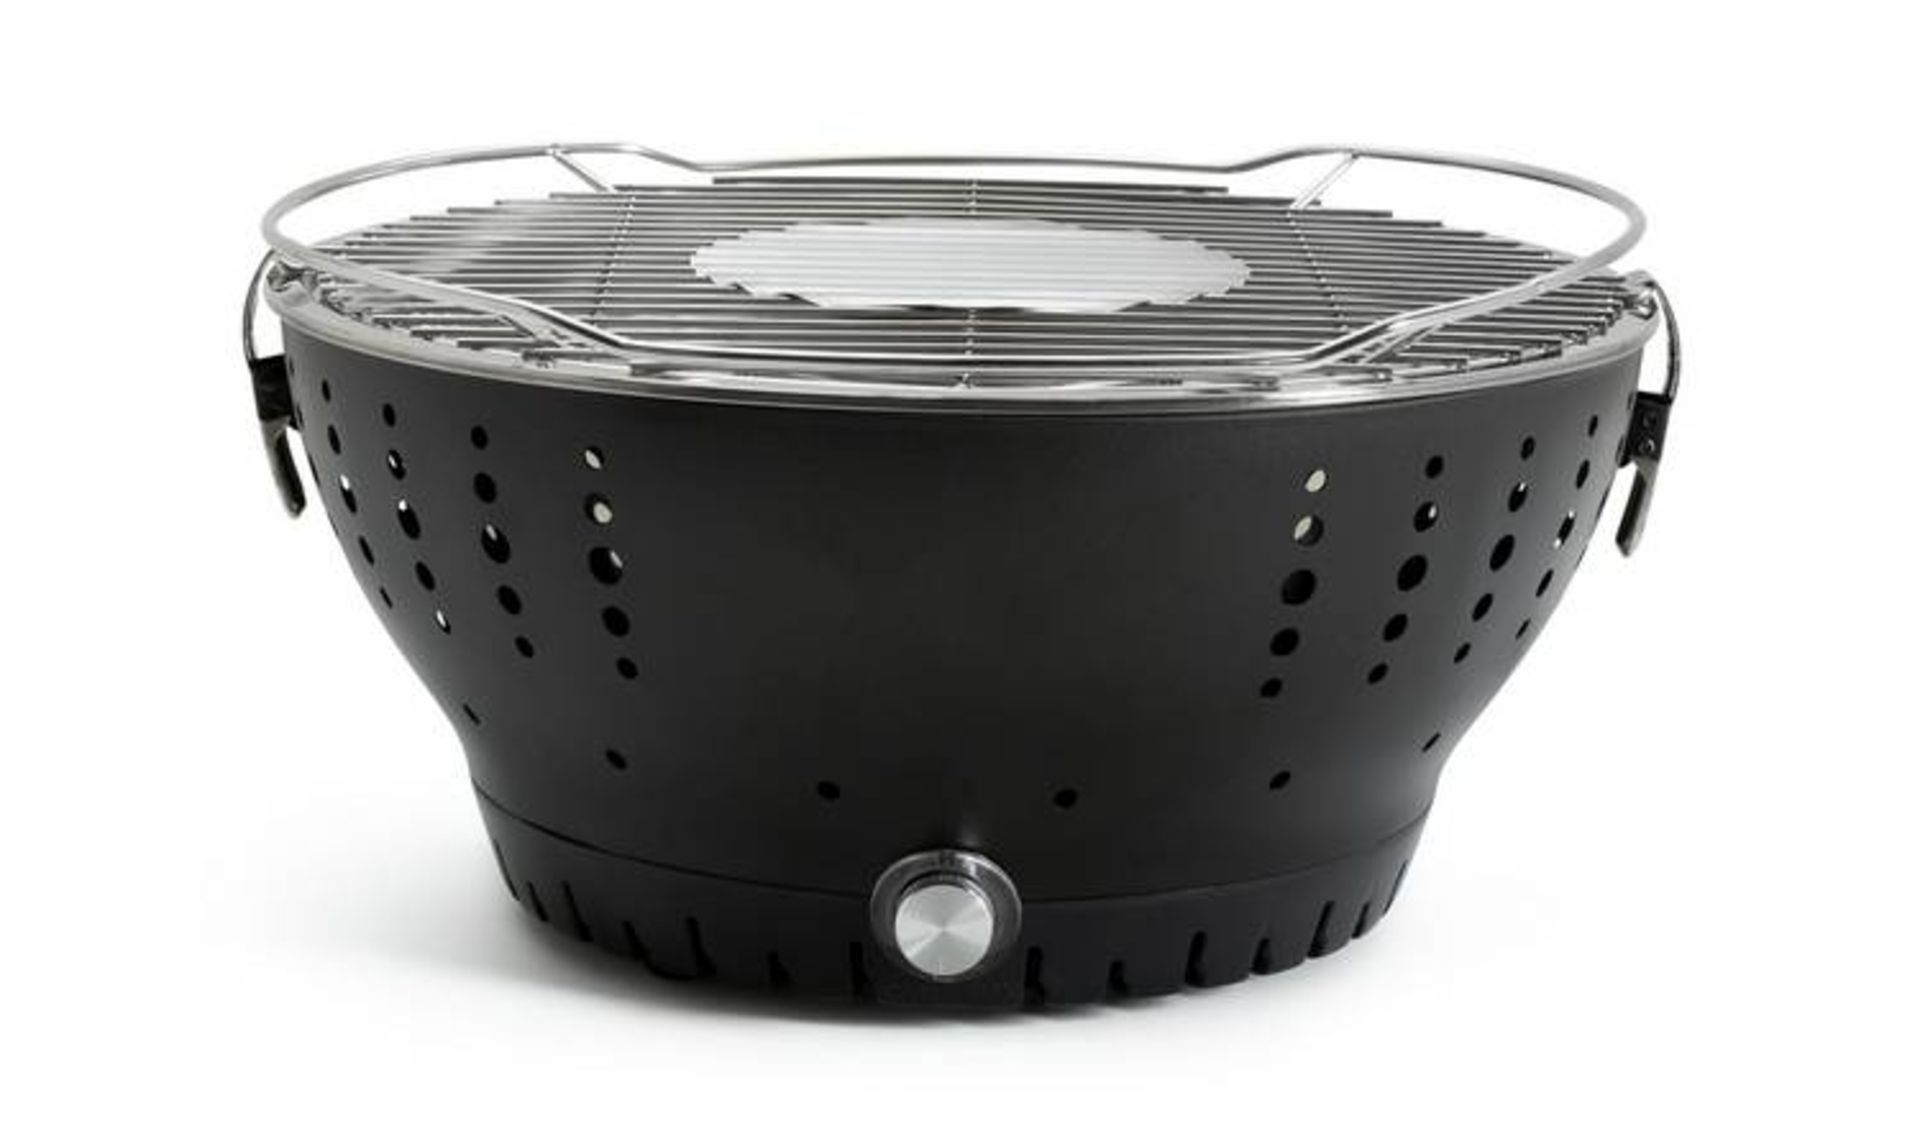 2 X BRAND NEW 38CM PREMIUM CHARCOAL BBQ WITH BUILT IN FANS RRP £89 EACH